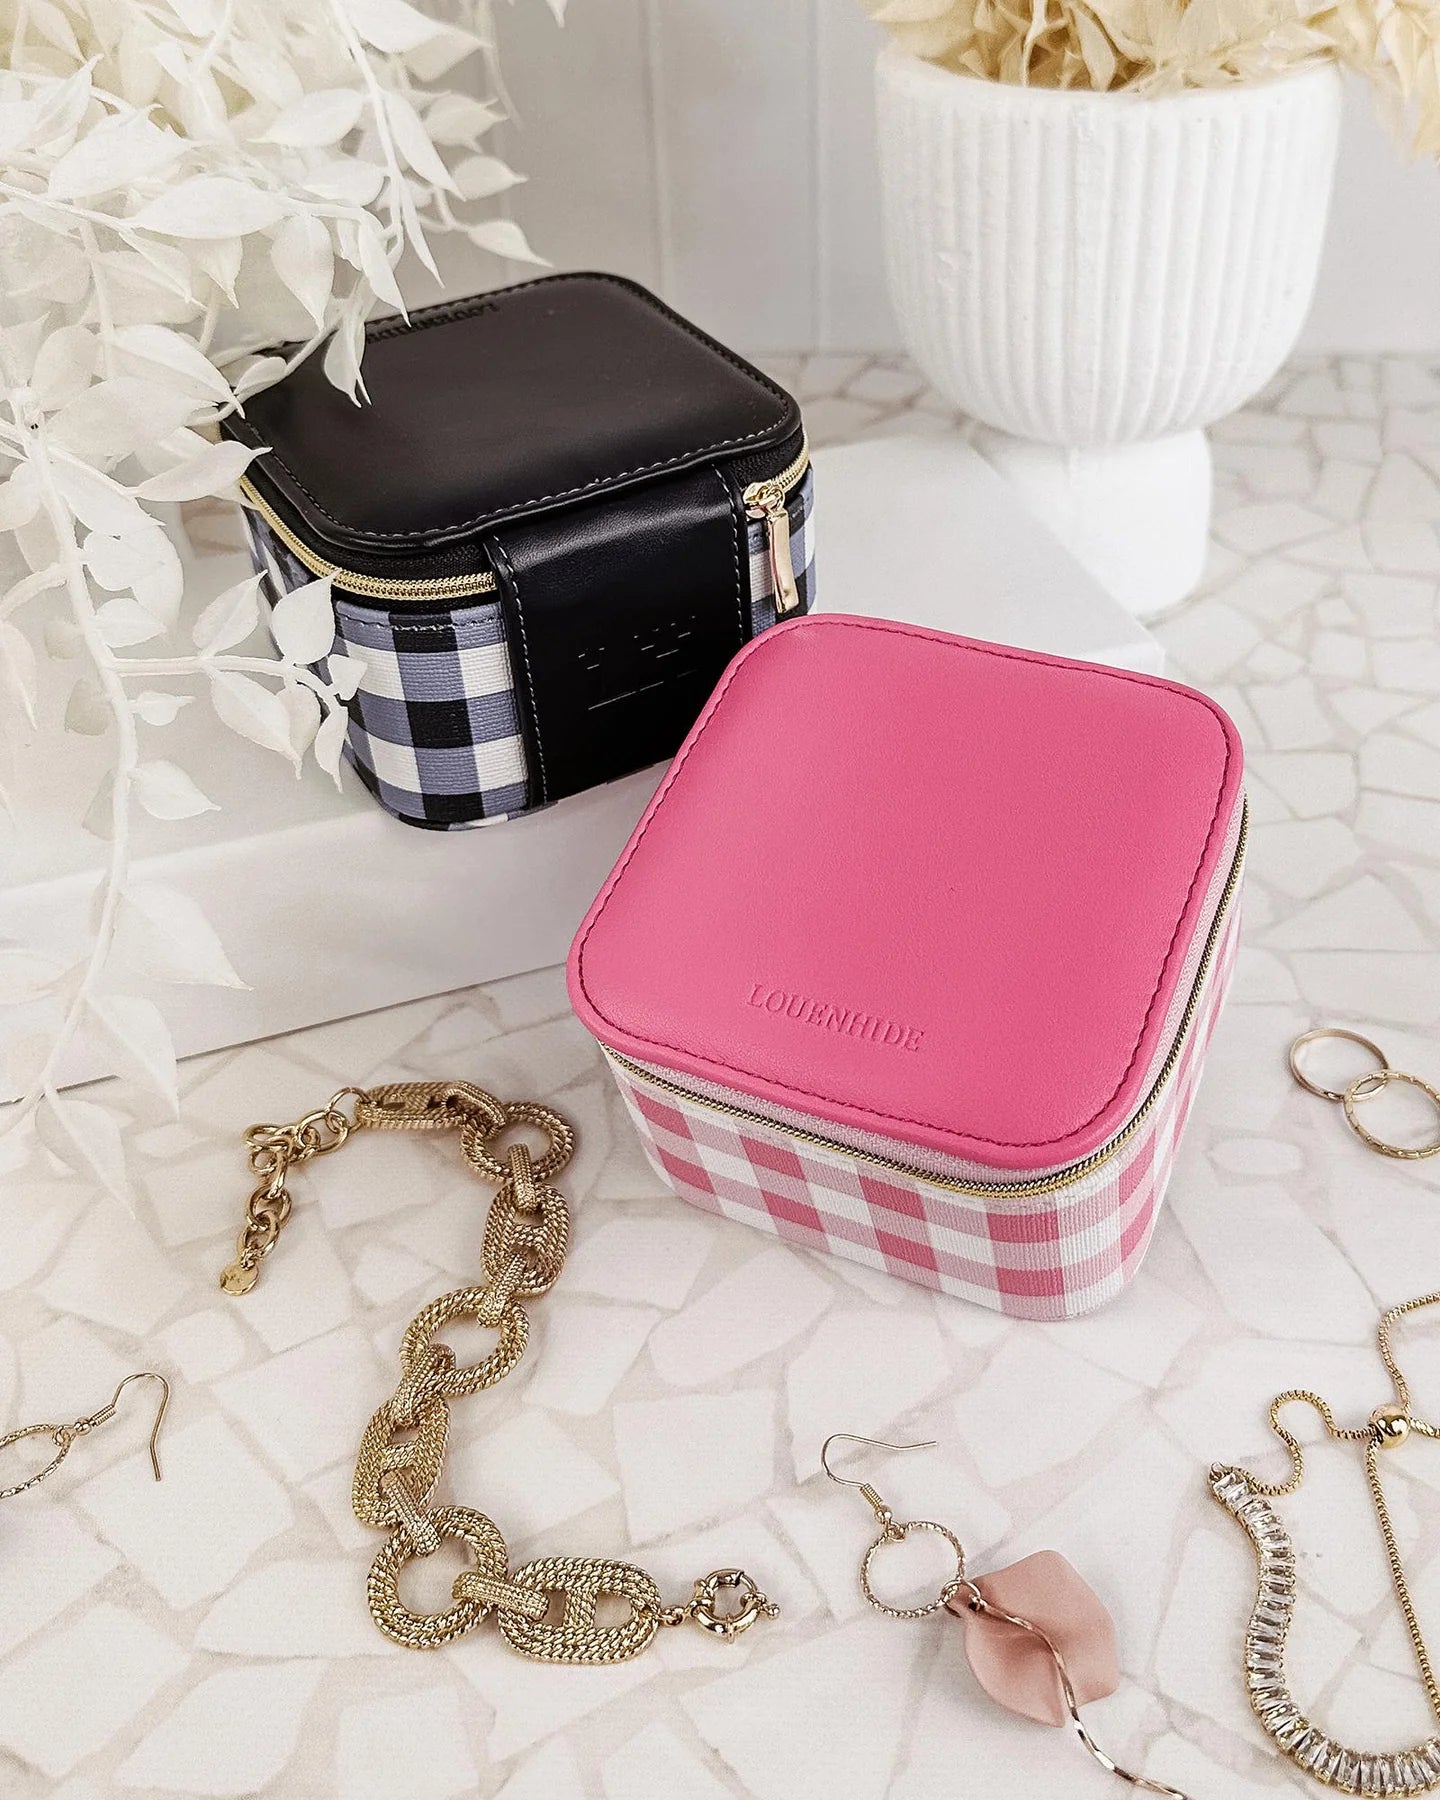 Beau Jewellery Box in Pink Gingham by Louenhide